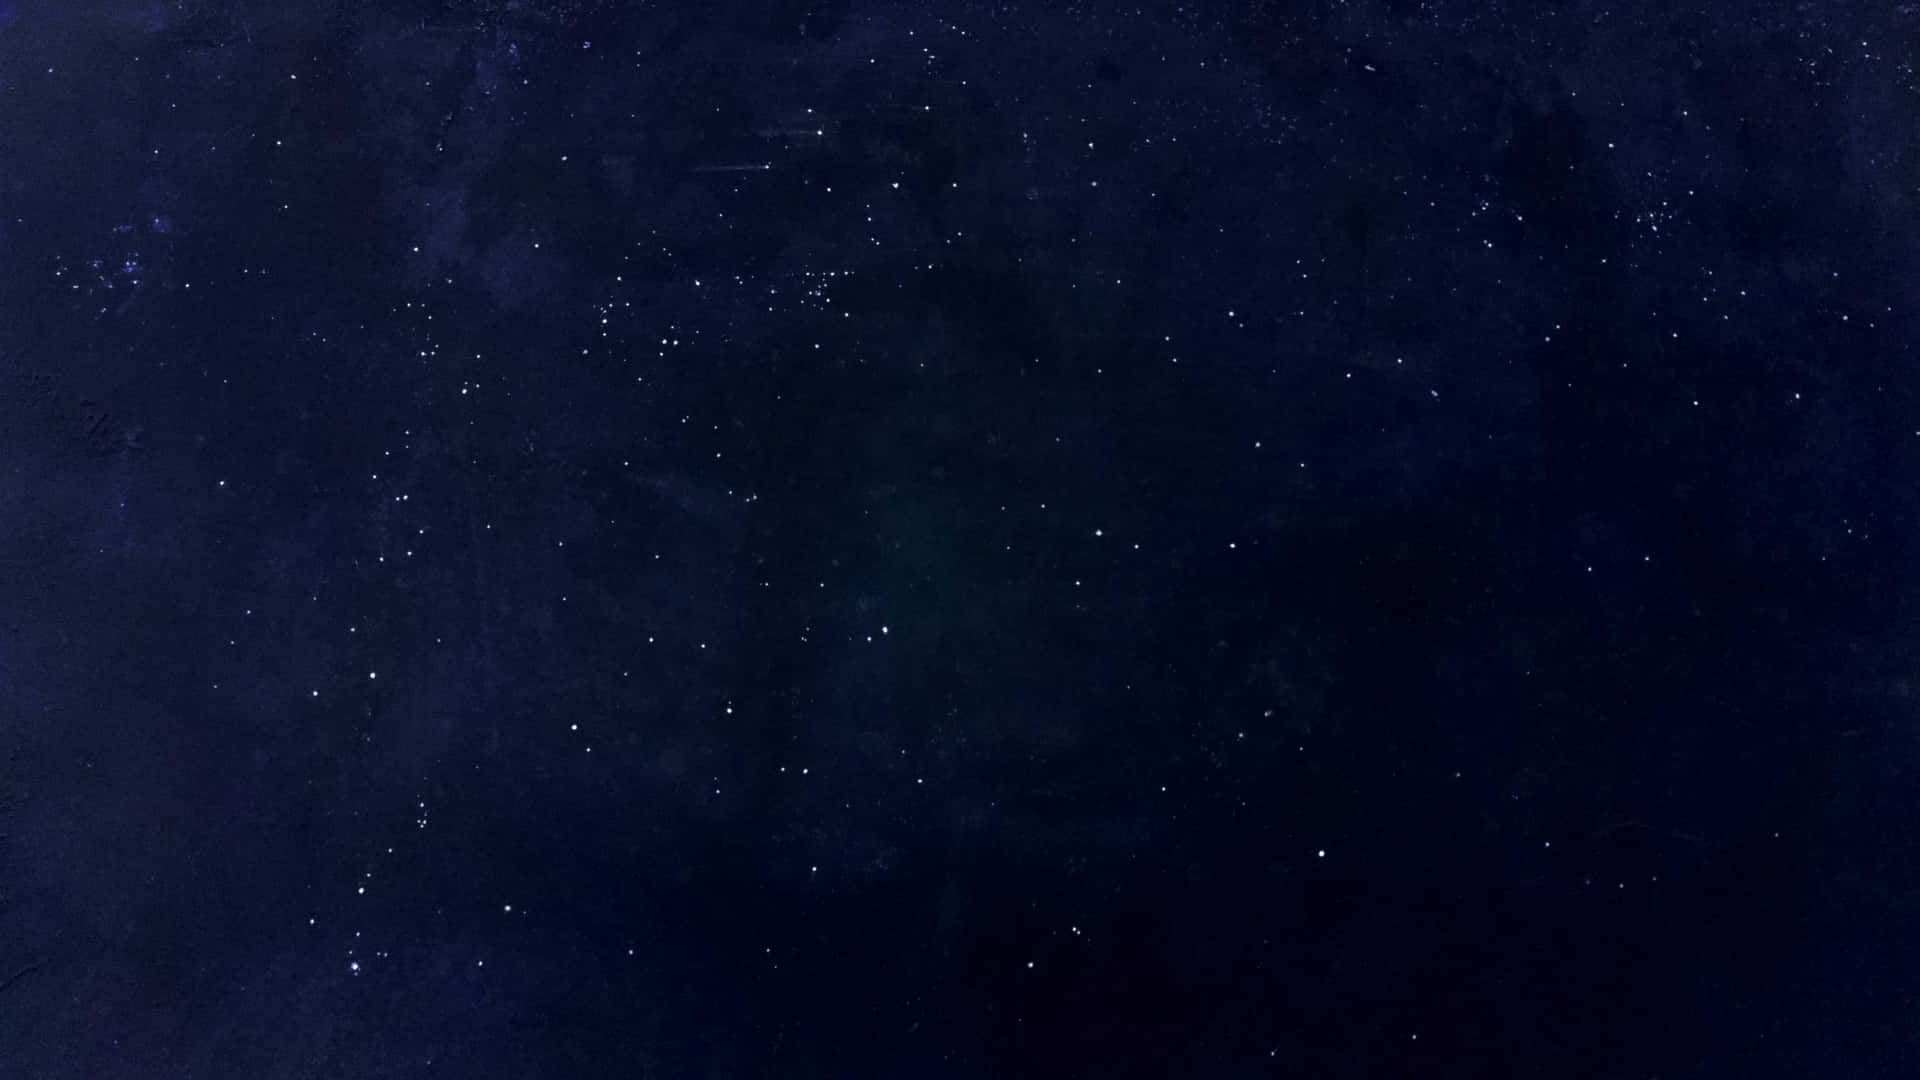 a painting of a dark night sky with stars Wallpaper